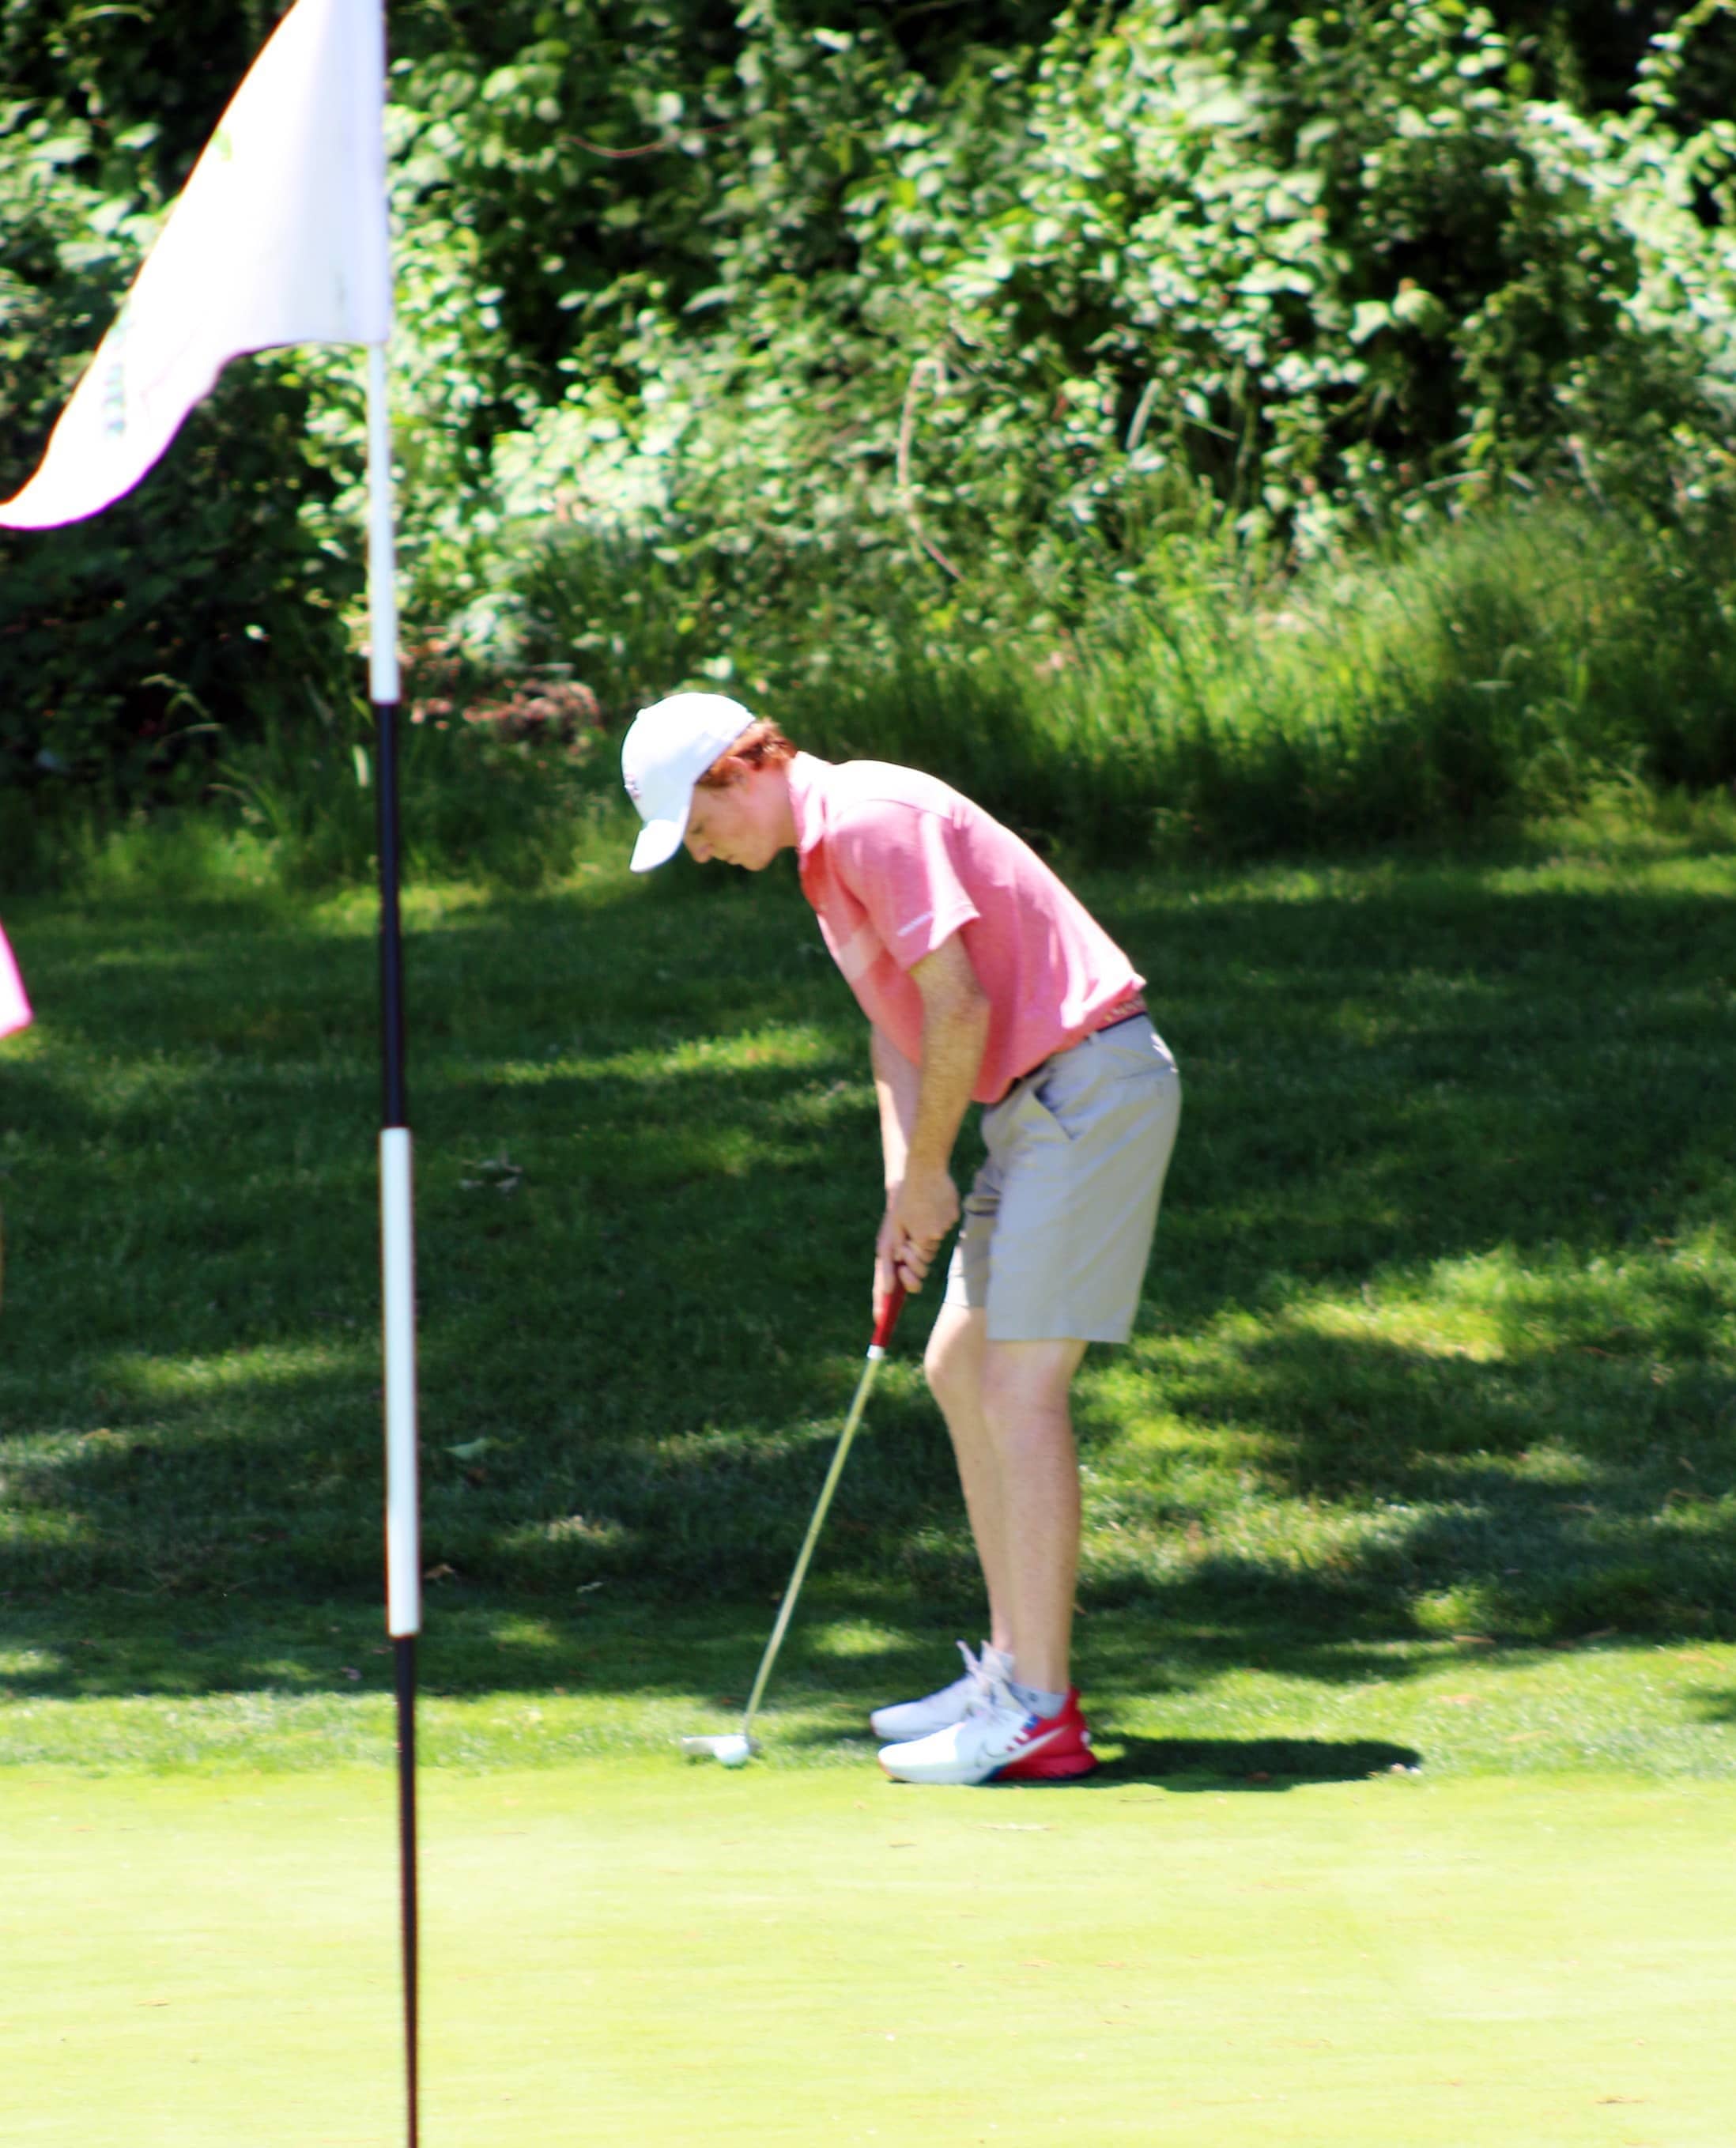 The Greenwich High School boys' golf team, a squad with no varsity experience to start the spring season, finished runners-up at this year's FCIAC tournament.